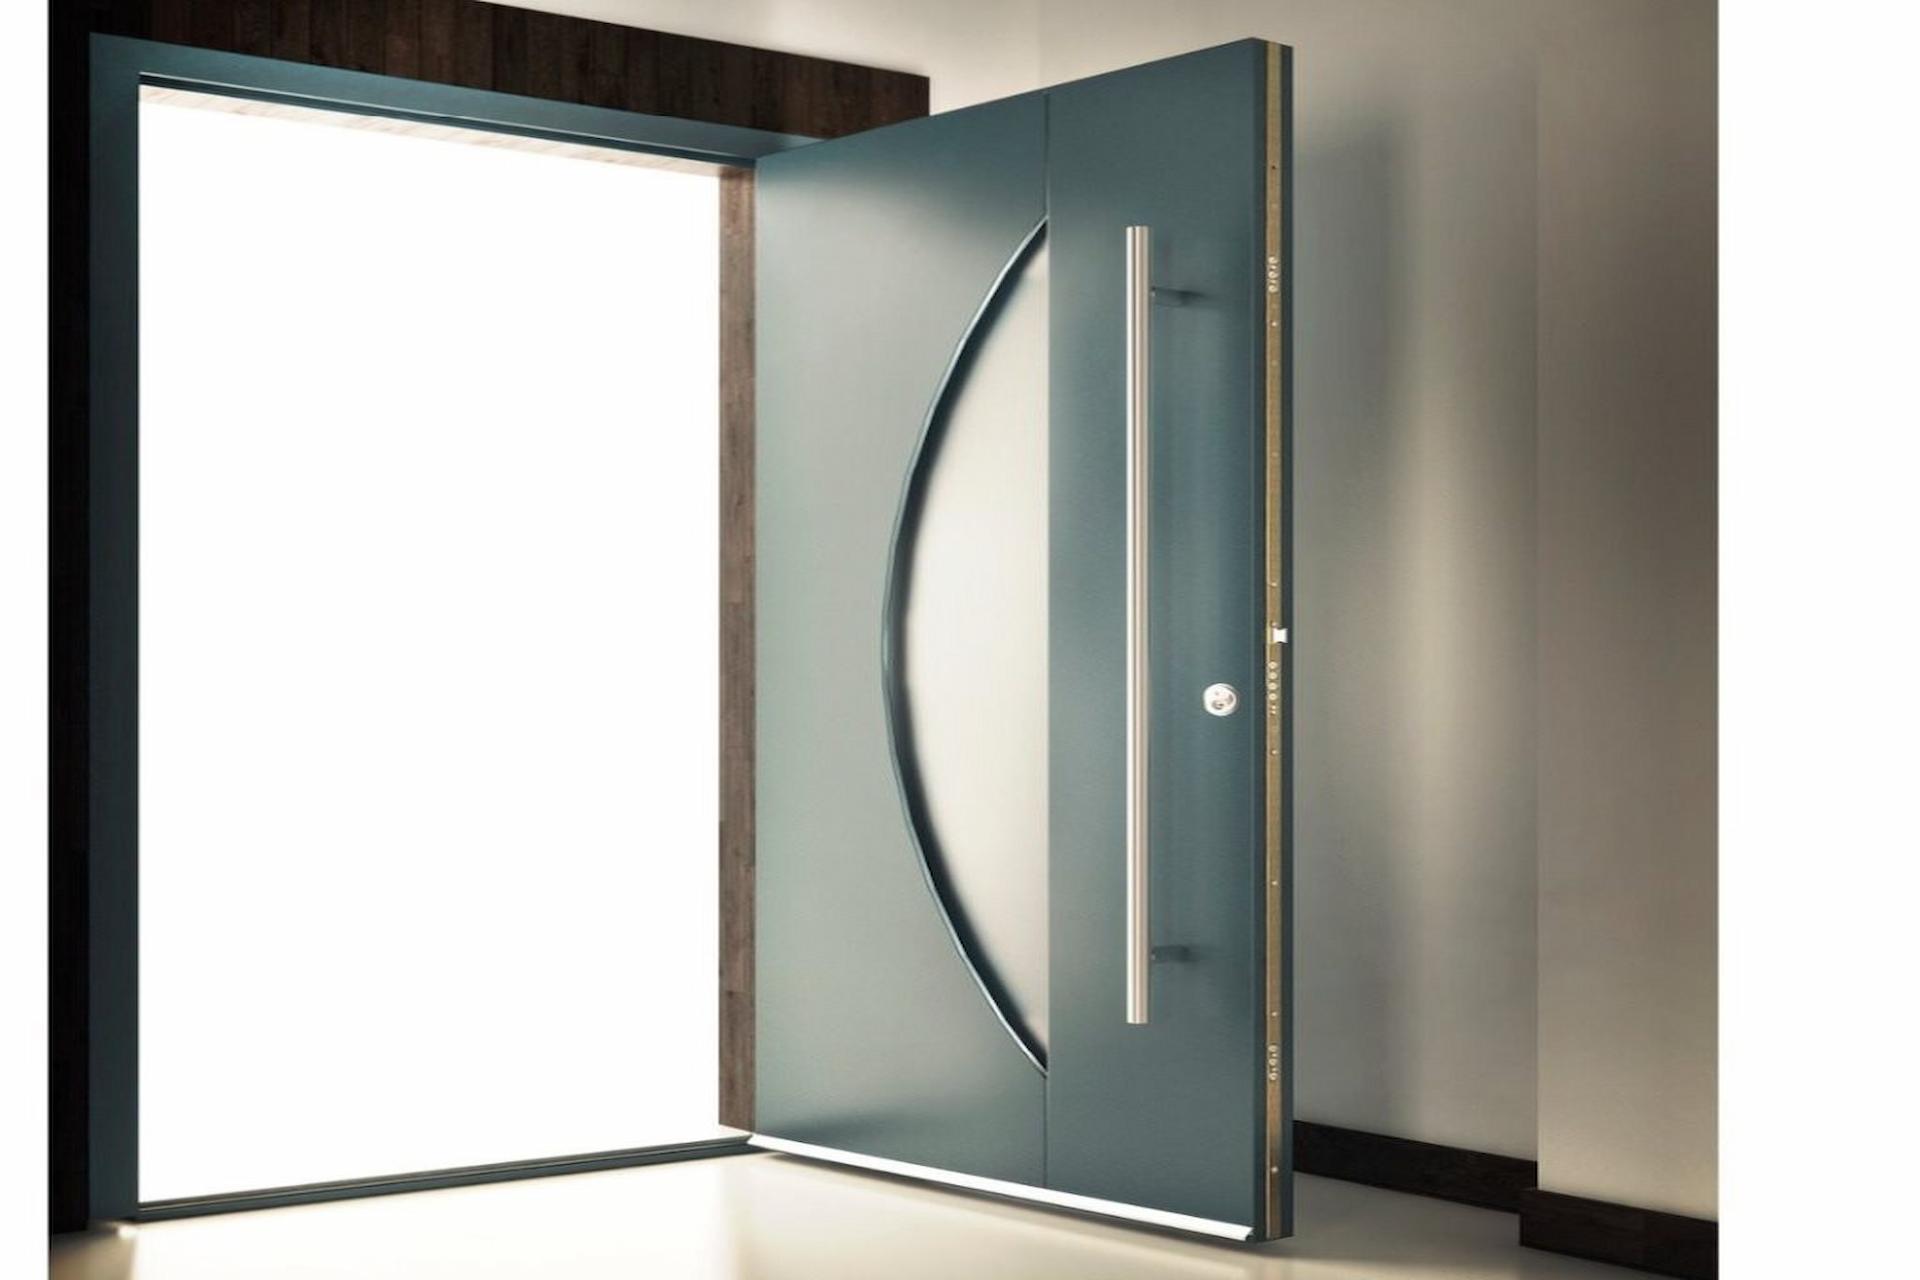 How Will You Be Benefited With The Help Of Smart Aluminium Doors?